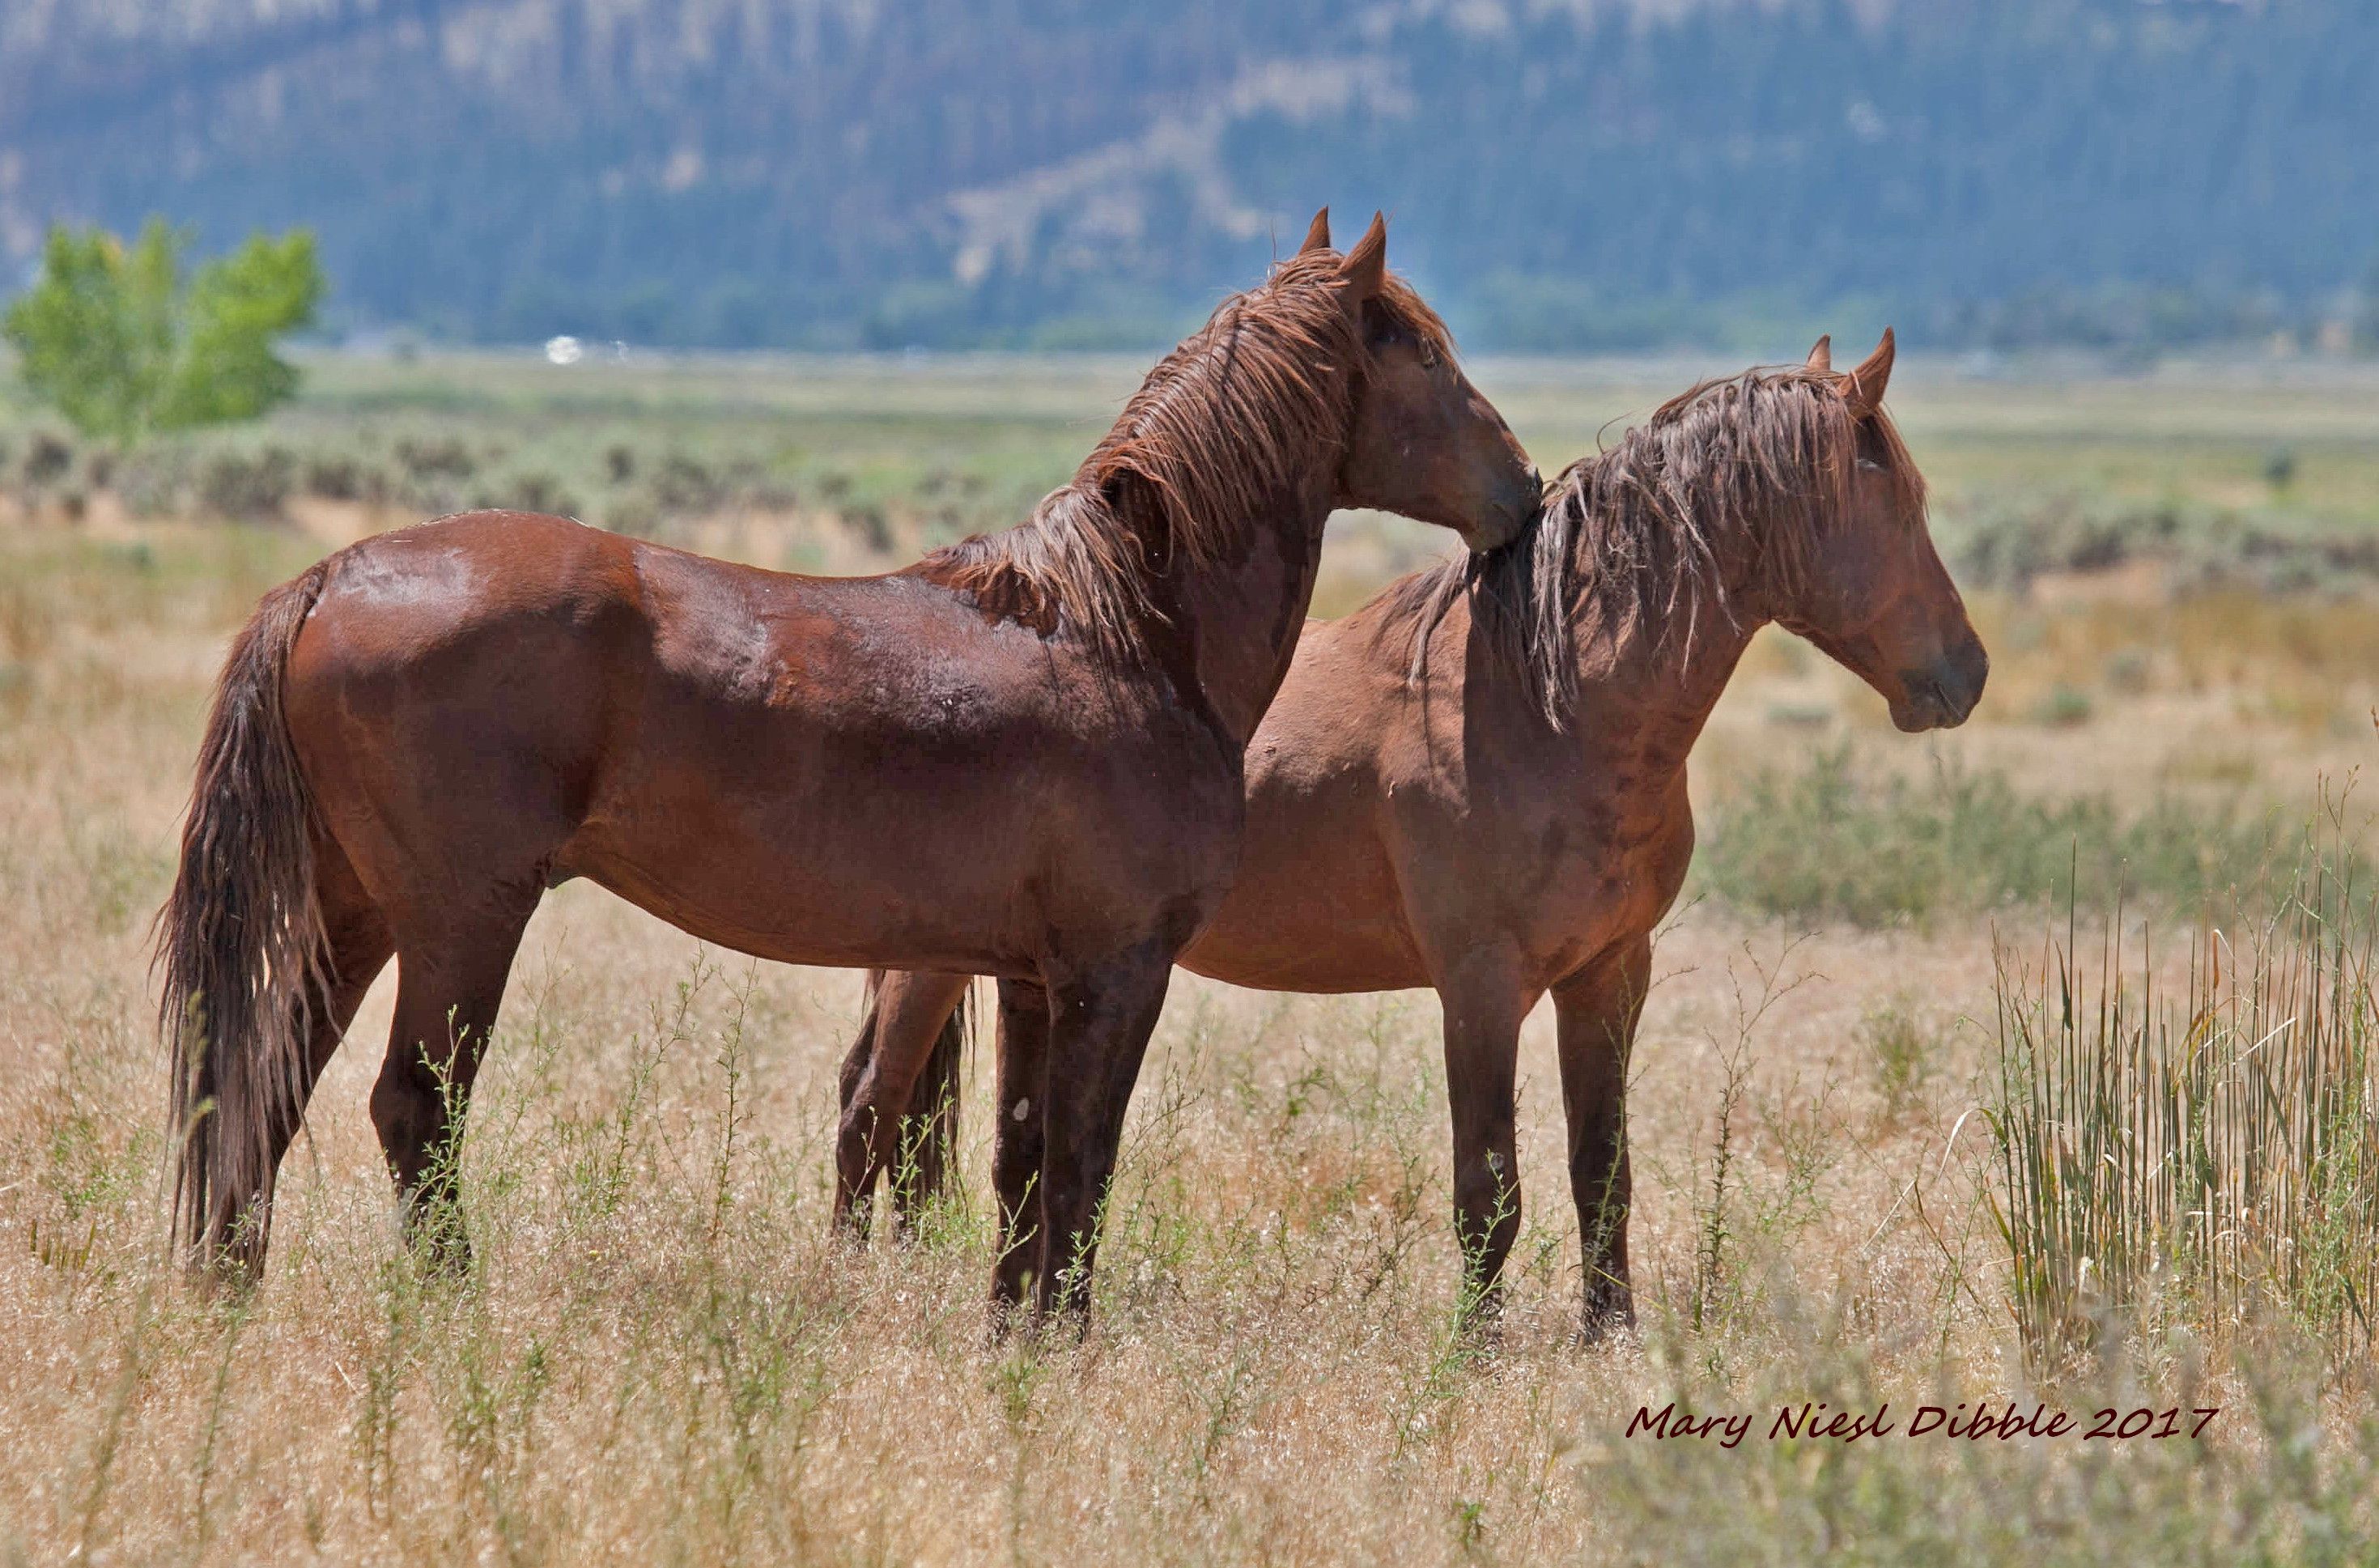 Pin by Mary Dibble on Wild horses | Pinterest | Horse